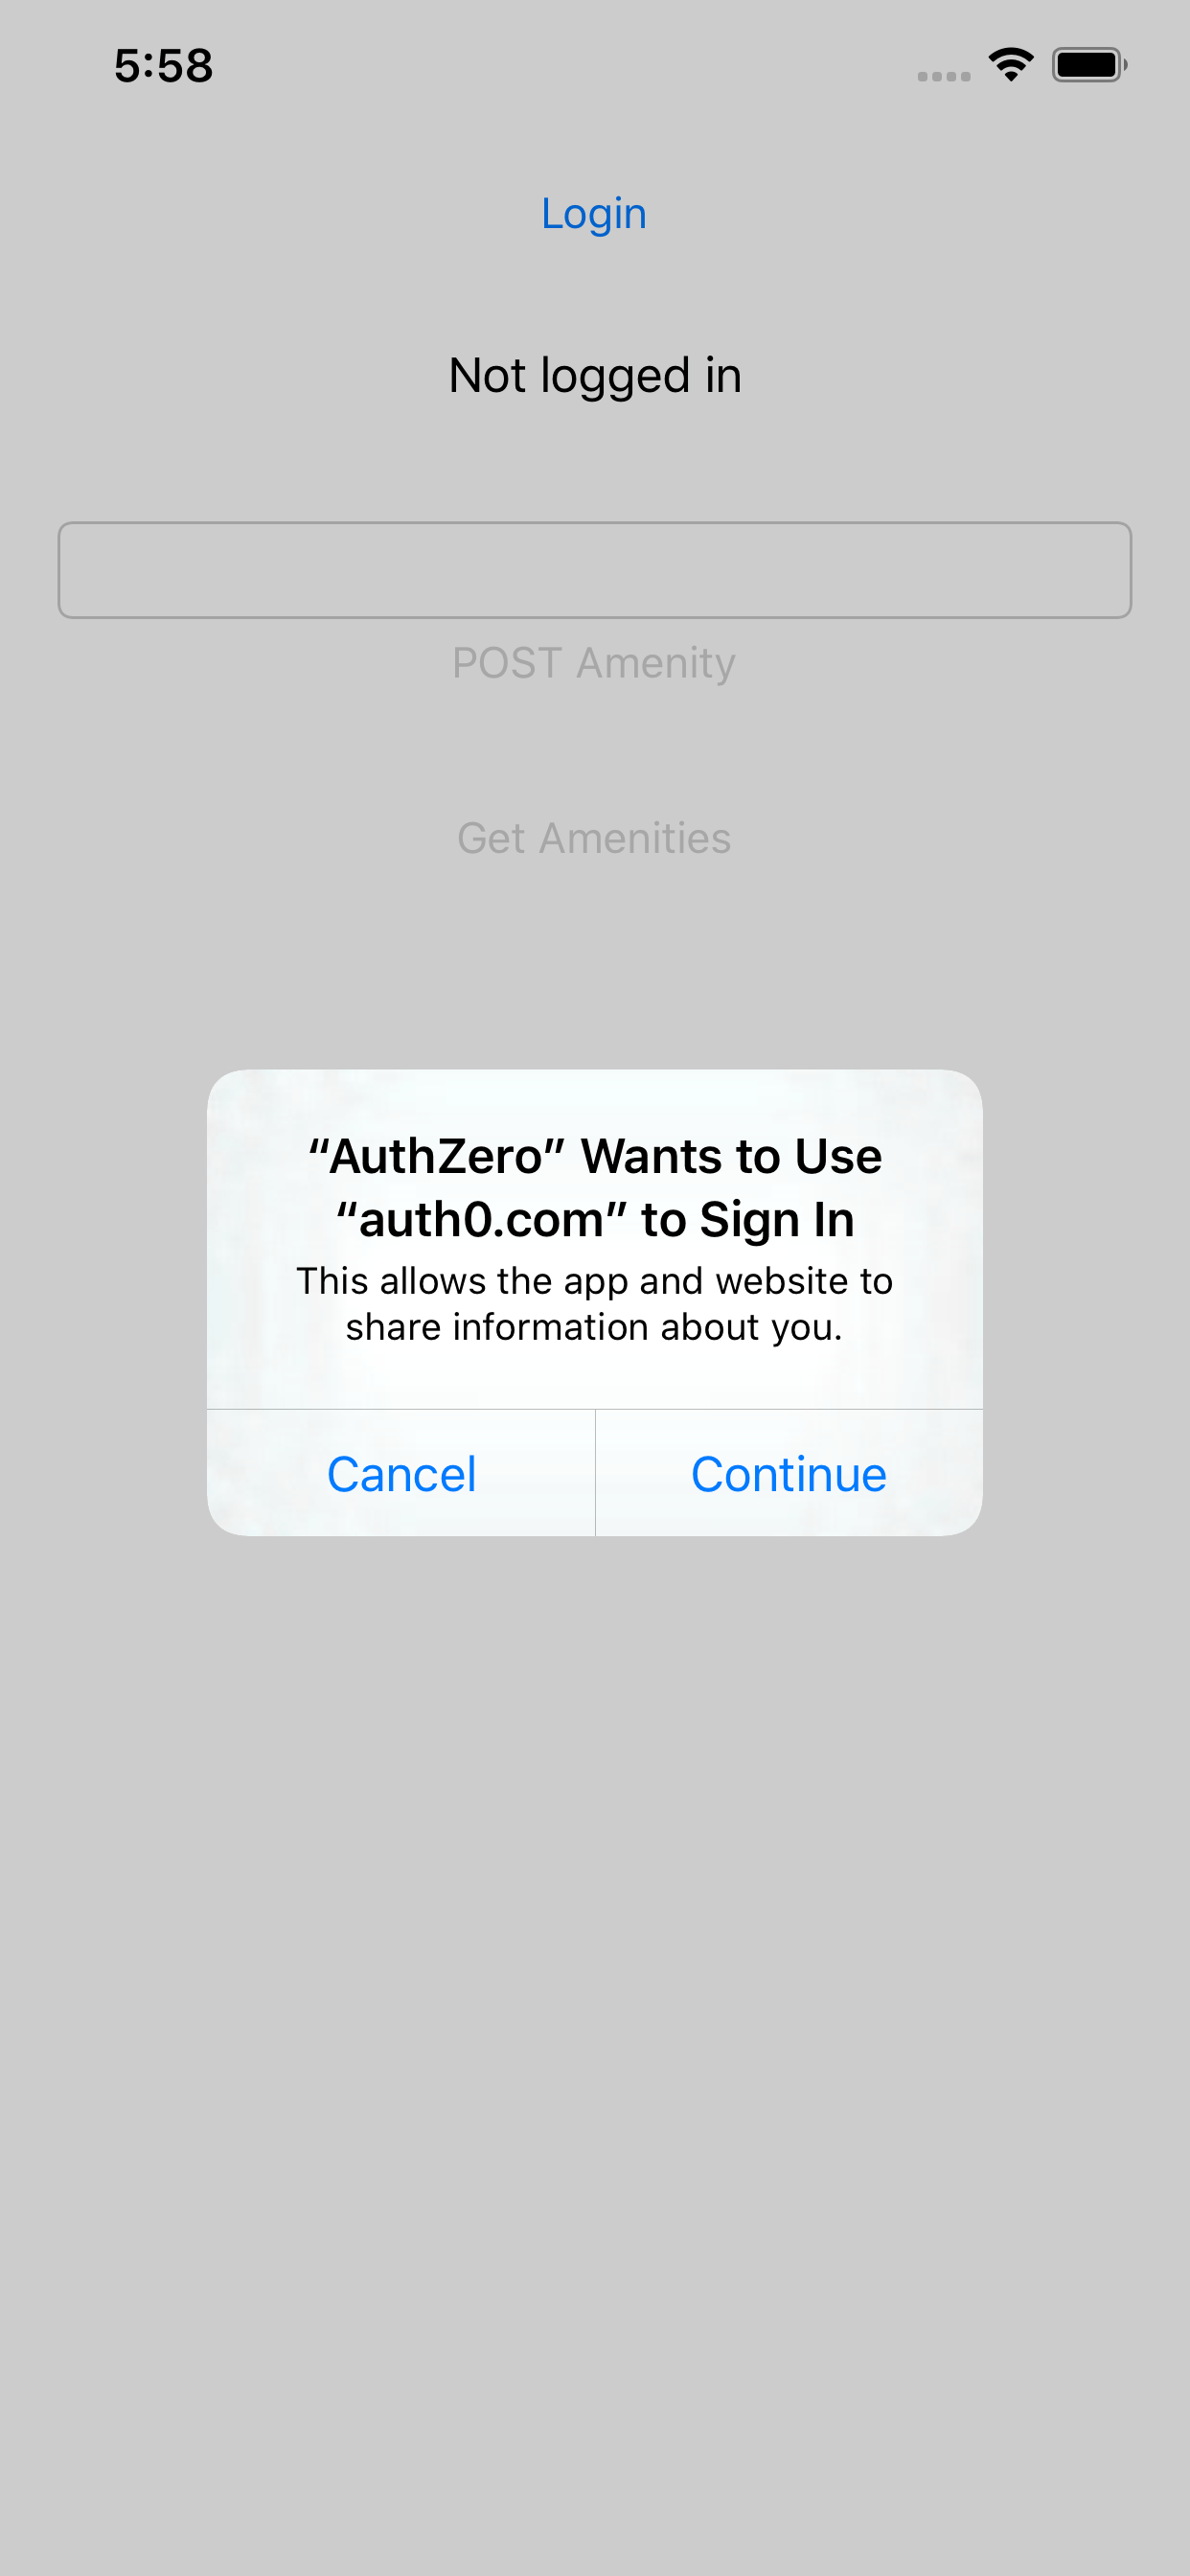 iOS permission prompt for Login